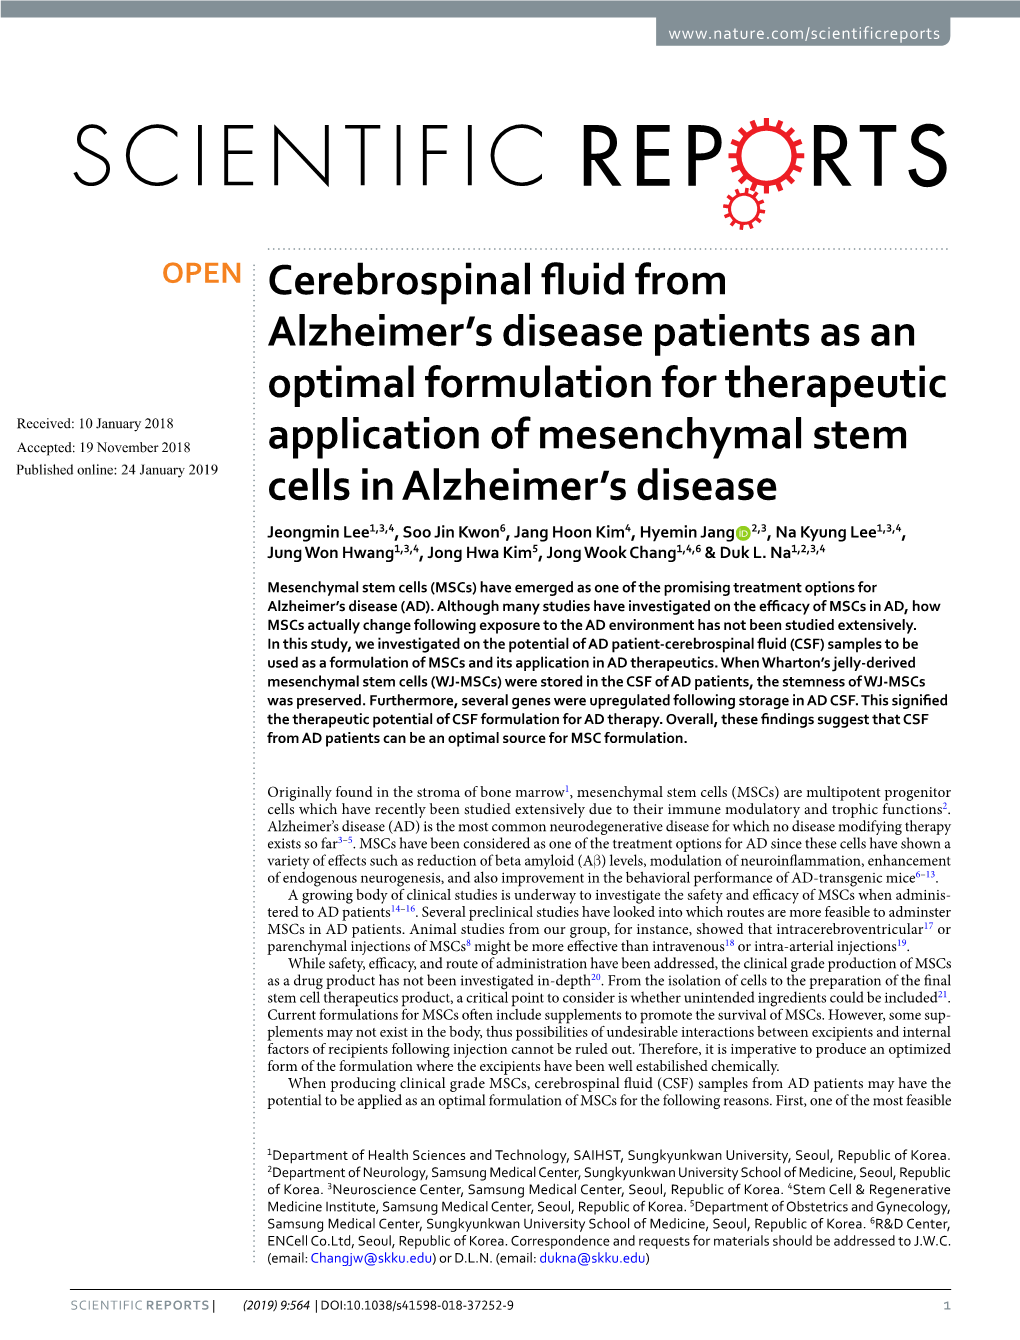 Cerebrospinal Fluid from Alzheimer's Disease Patients As an Optimal